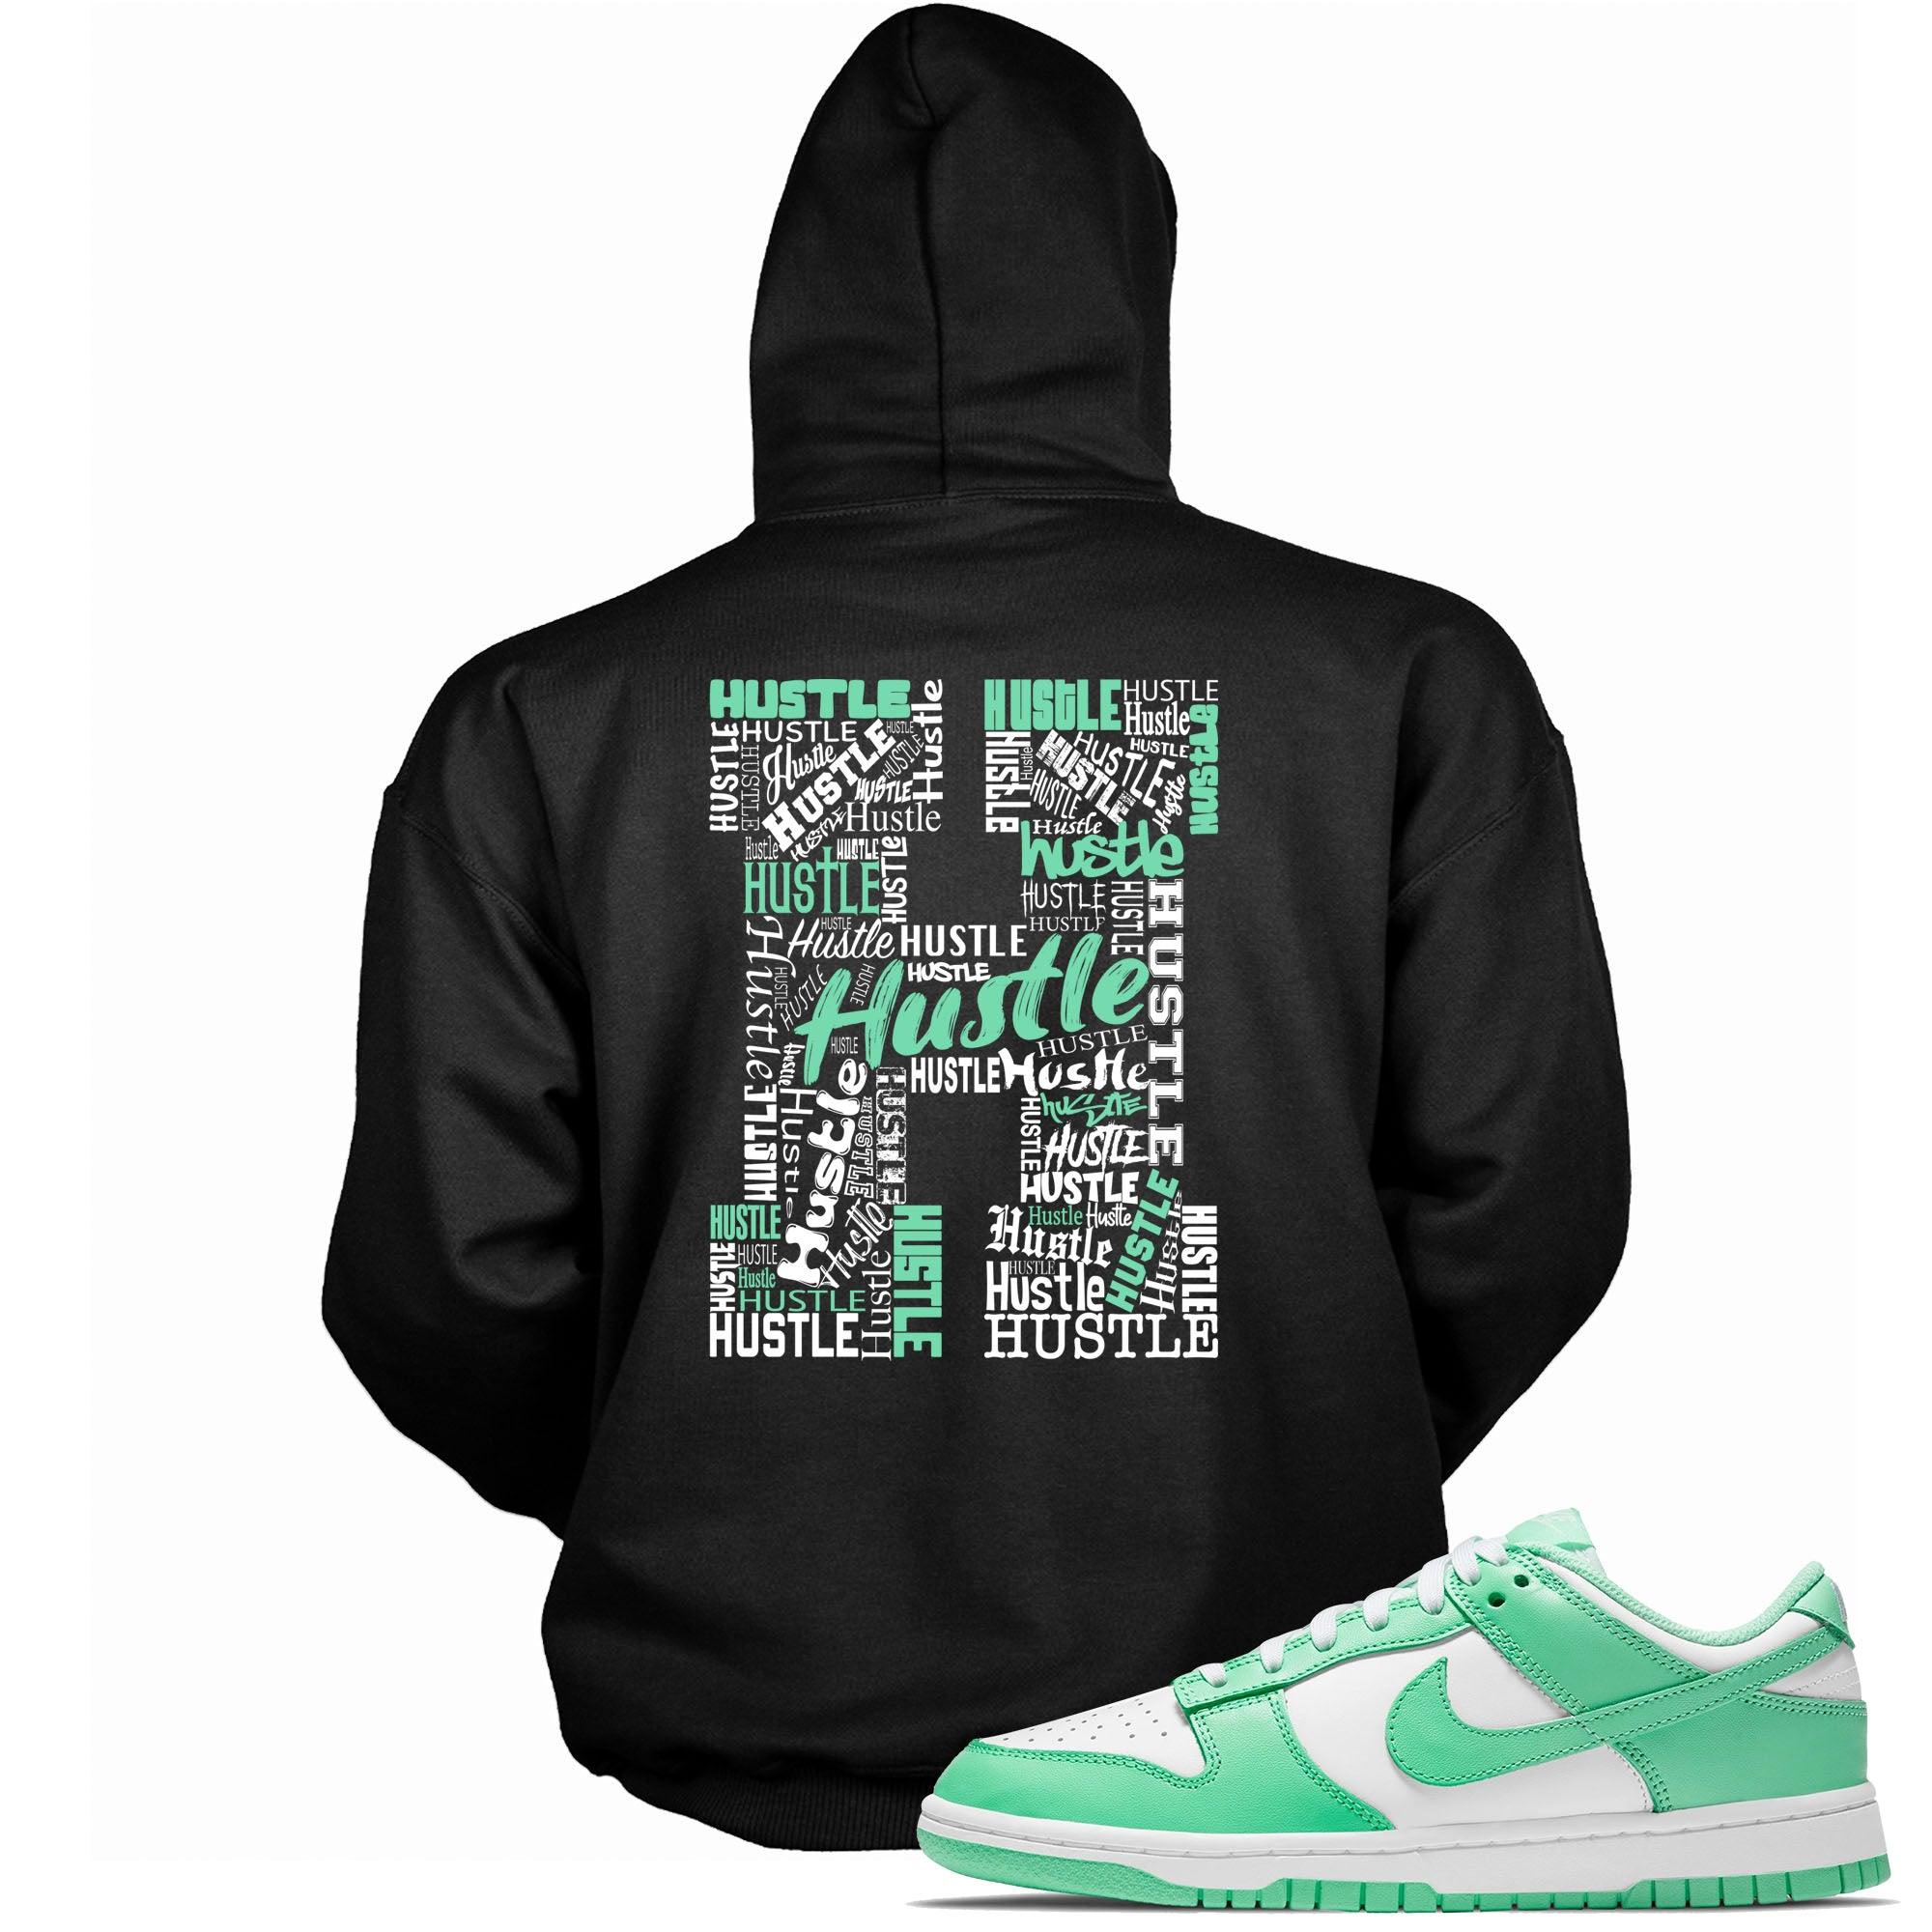 Cool Black Graphic Hoodie with “ Hustle H “ print, that perfectly matches Nike Dunk Green Glow sneakers